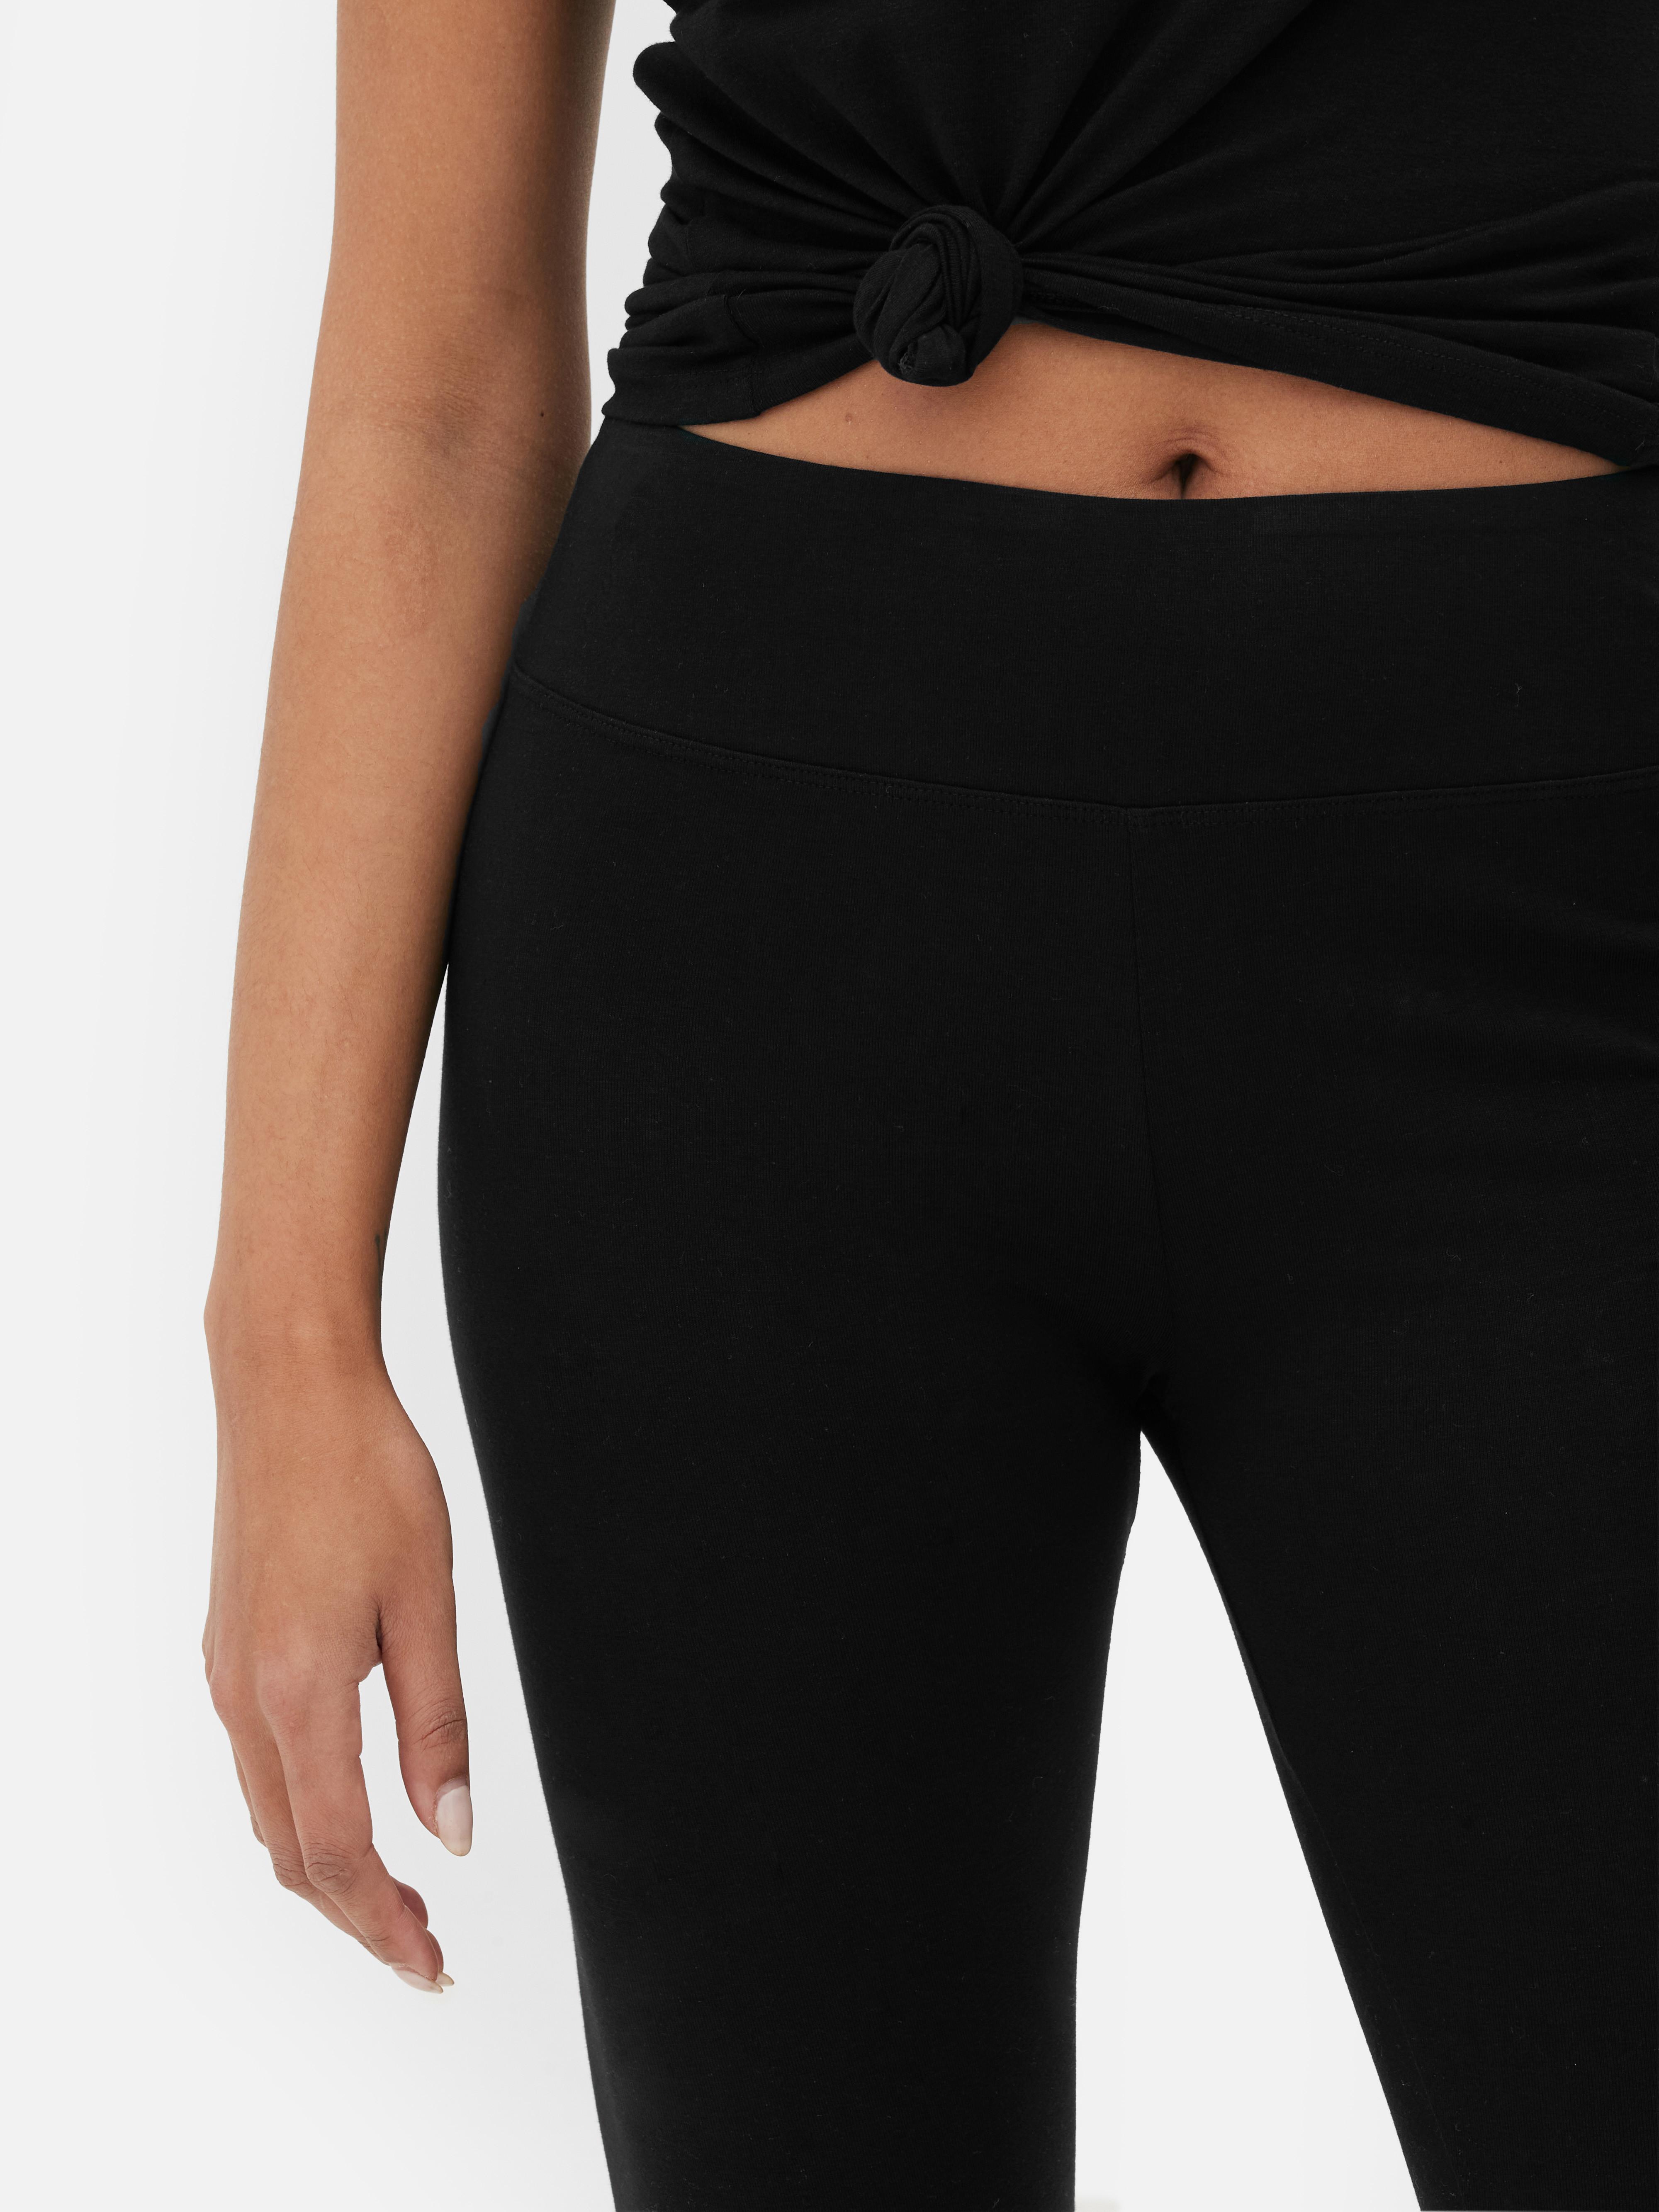 Buy Pineapple Black Band High Waisted Crop Leggings from Next USA